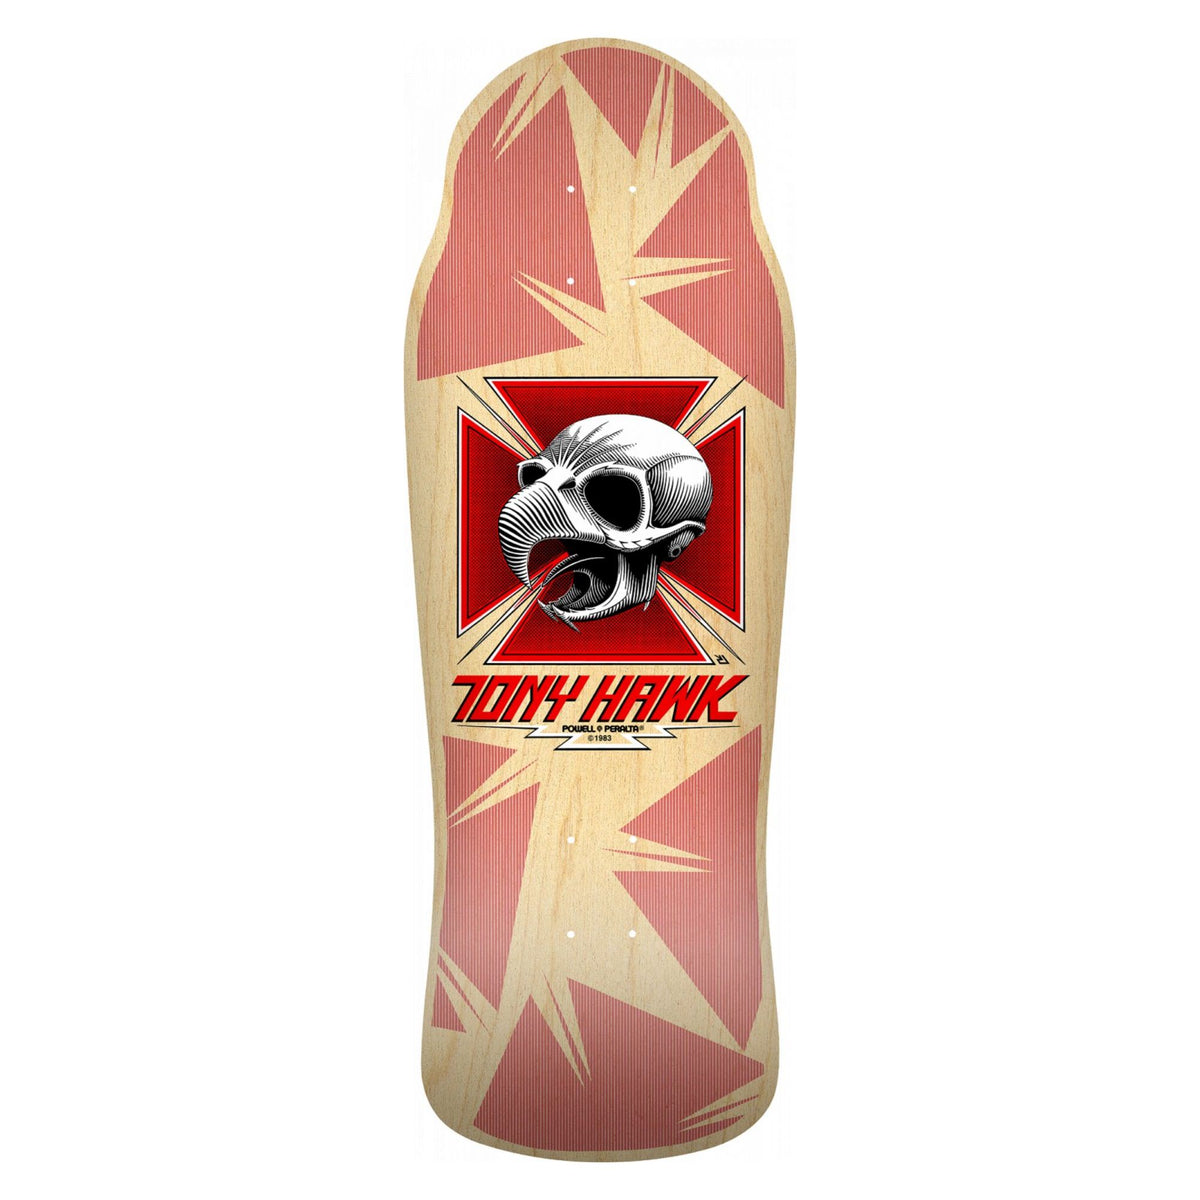 Powell-Peralta Re-Issue Limited Edition Collector Skateboard Decks, Series 11, Tony Hawk